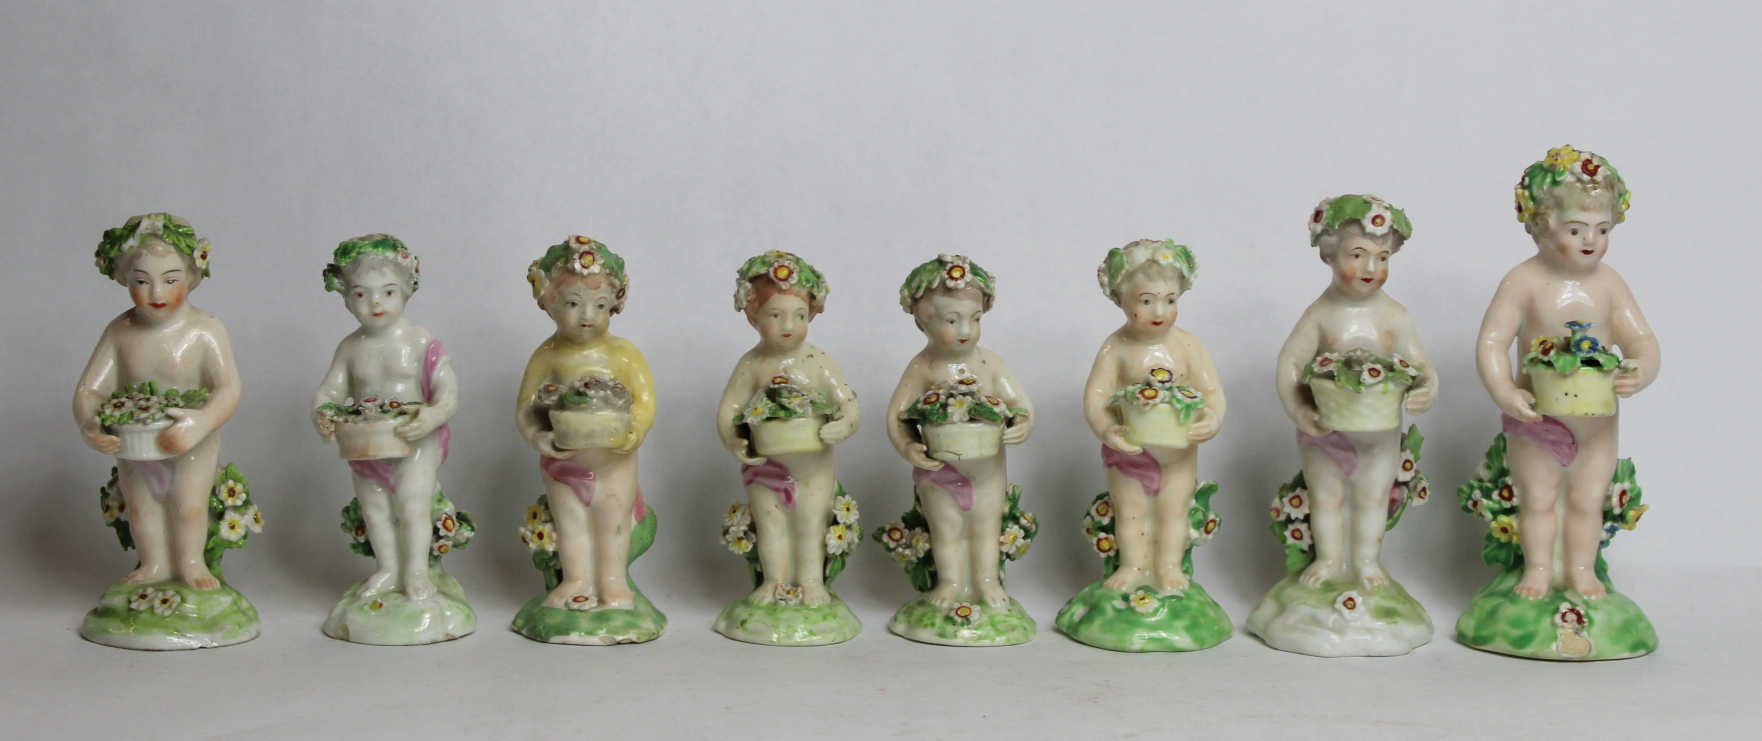 Seven 18th century Derby porcelain small figures of putti holding baskets of flowers, all with patch